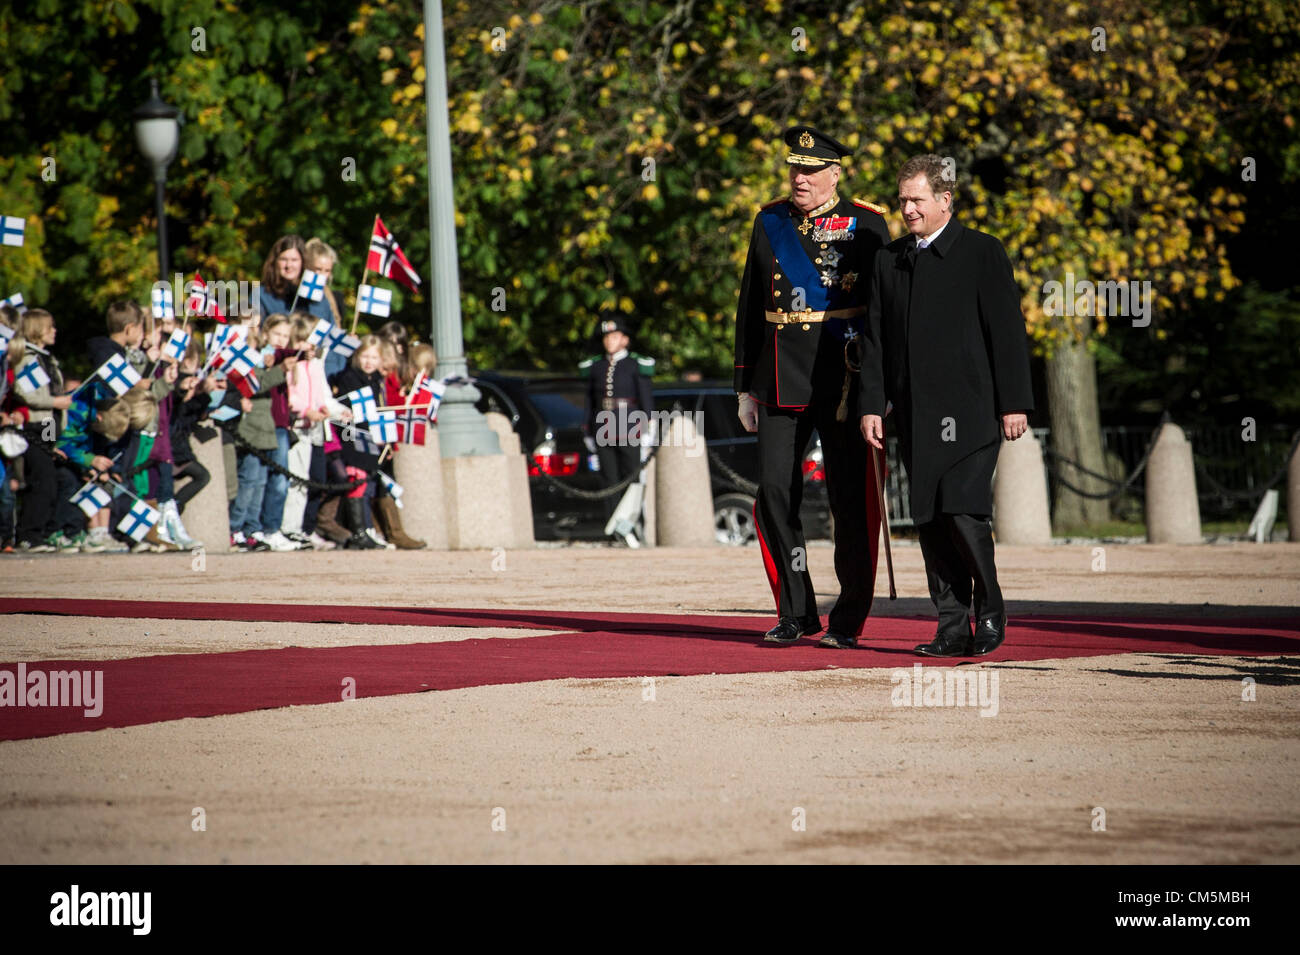 Oslo, Norway. 10/10/2012. The Finnish president Sauli Niinsto and The Norwegian King Harald seen outside the castle in Oslo. Stock Photo